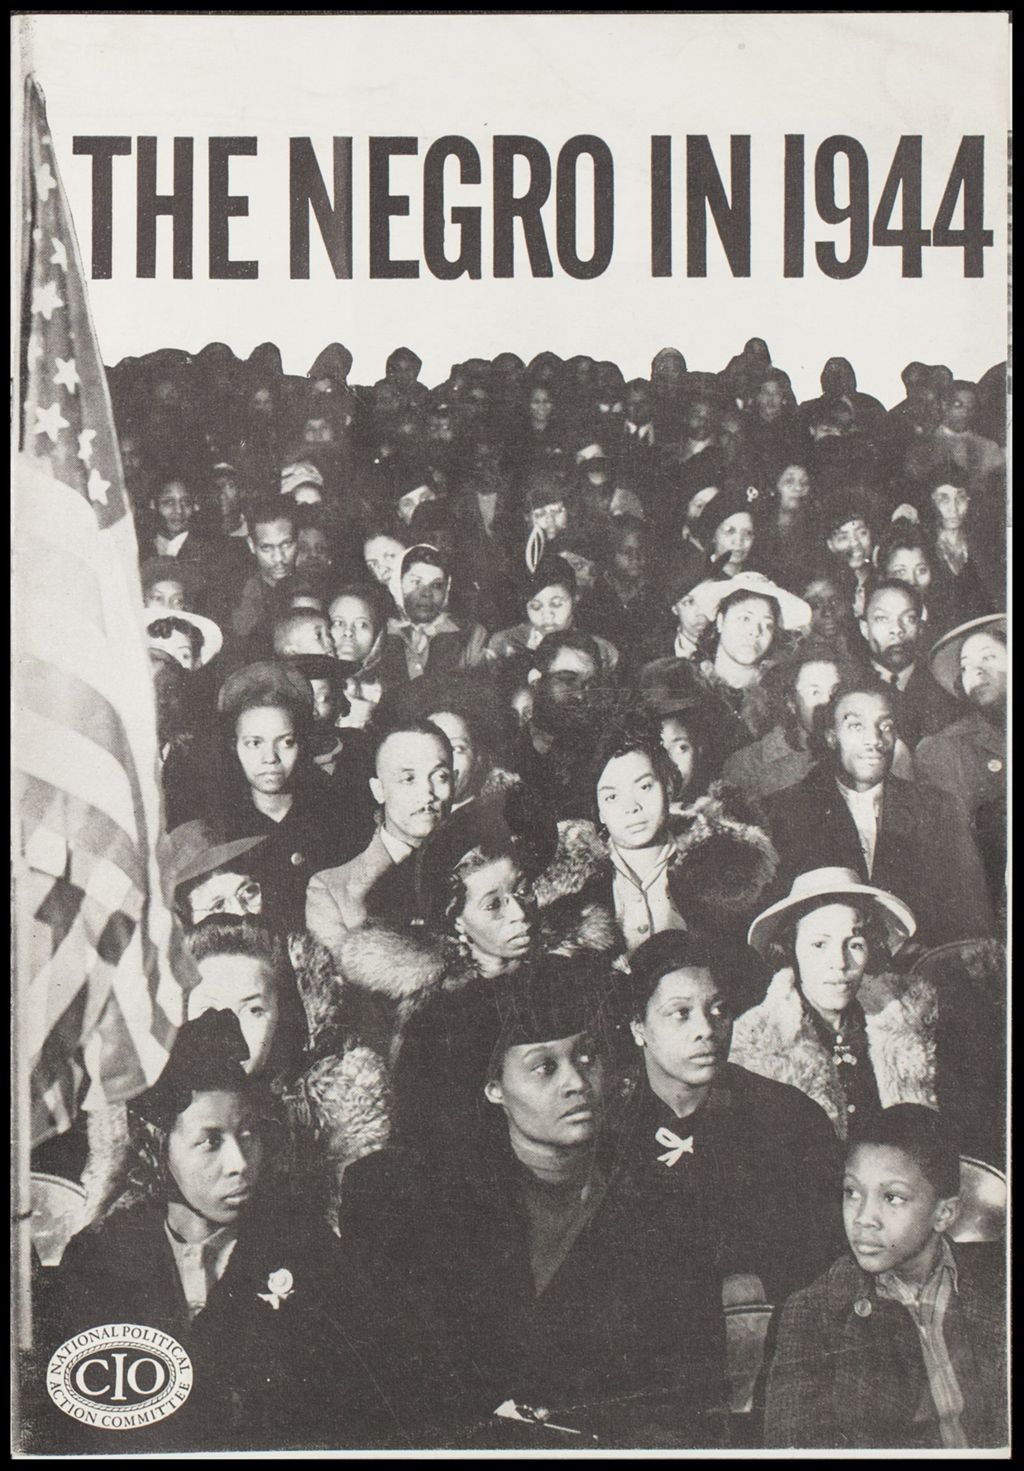 Miniature of Congress of Industrial Organizations - The Negro in 1944 pamphlet, 1944 (Folder I-2702)